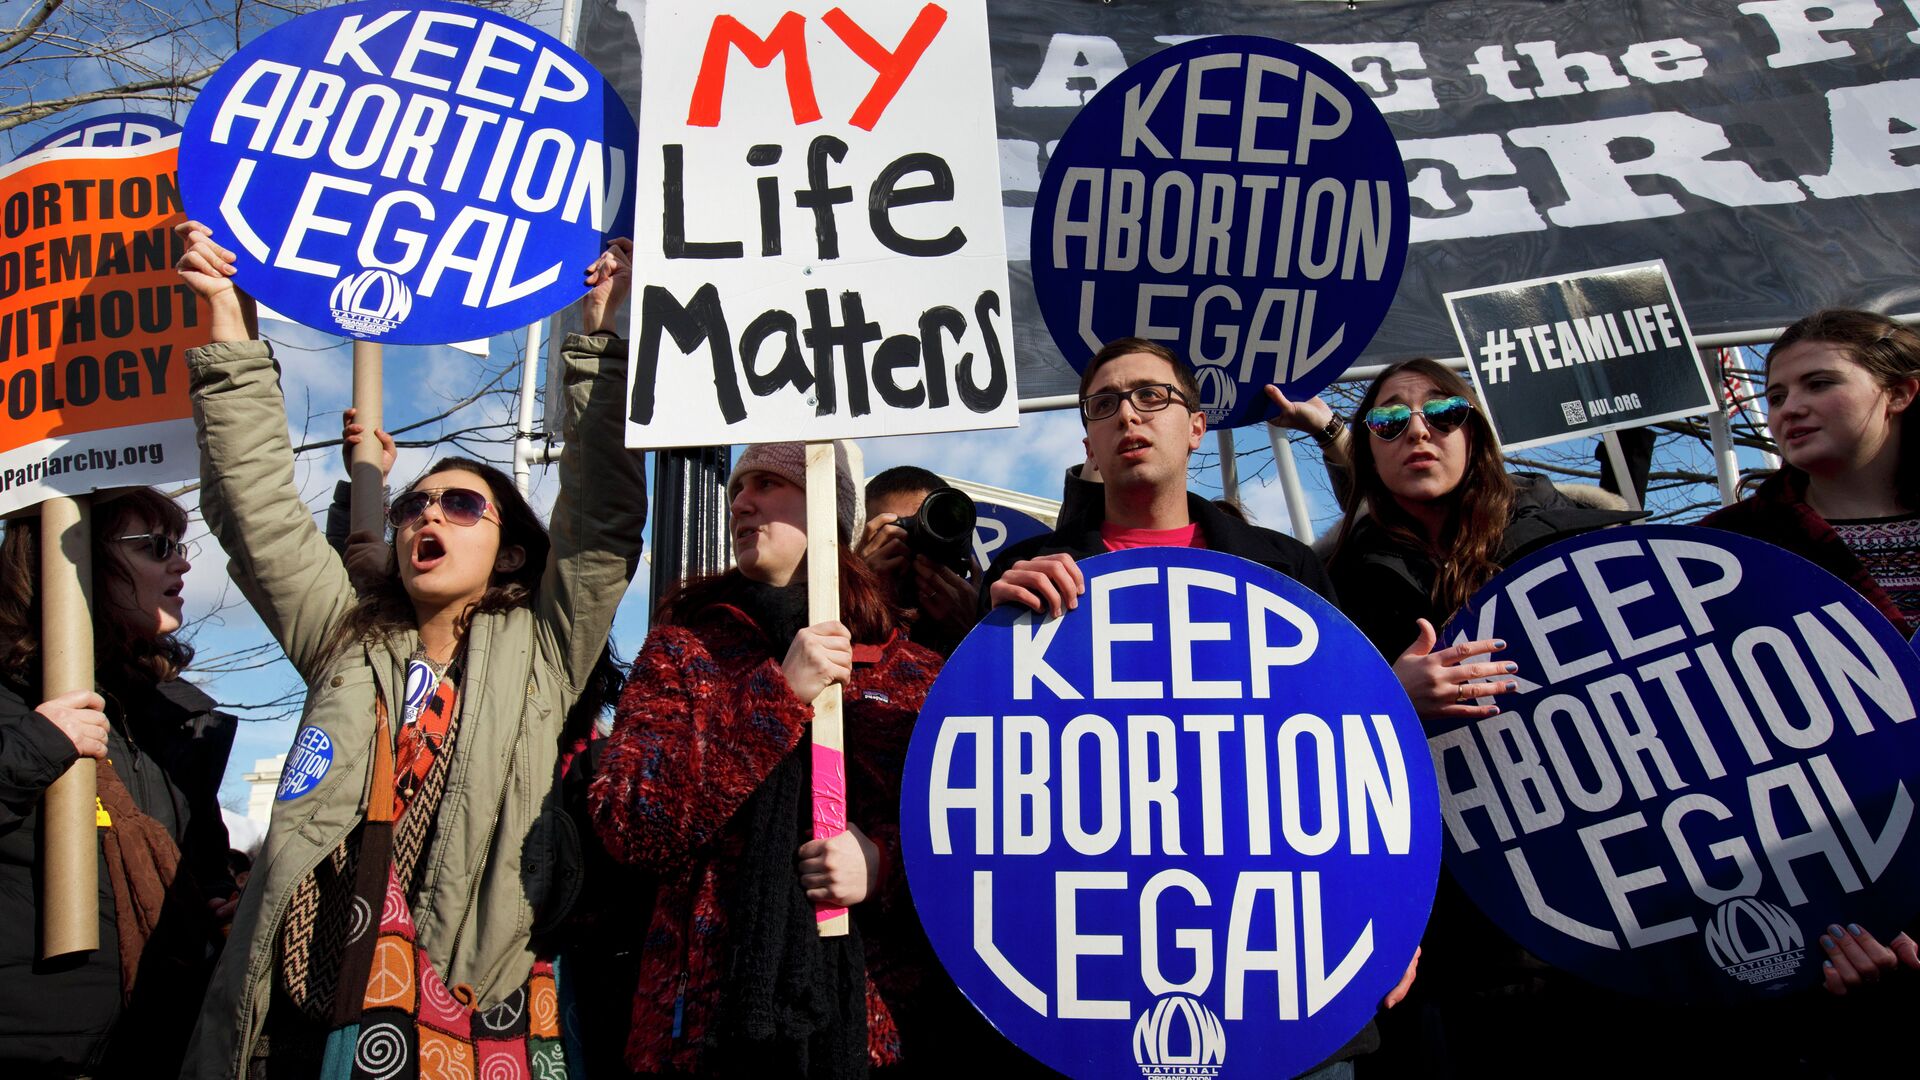 Abortion rights advocates hold signs while anti-abortion demonstrators walk by during the annual March for Life in Washington, DC. - Sputnik International, 1920, 30.03.2022